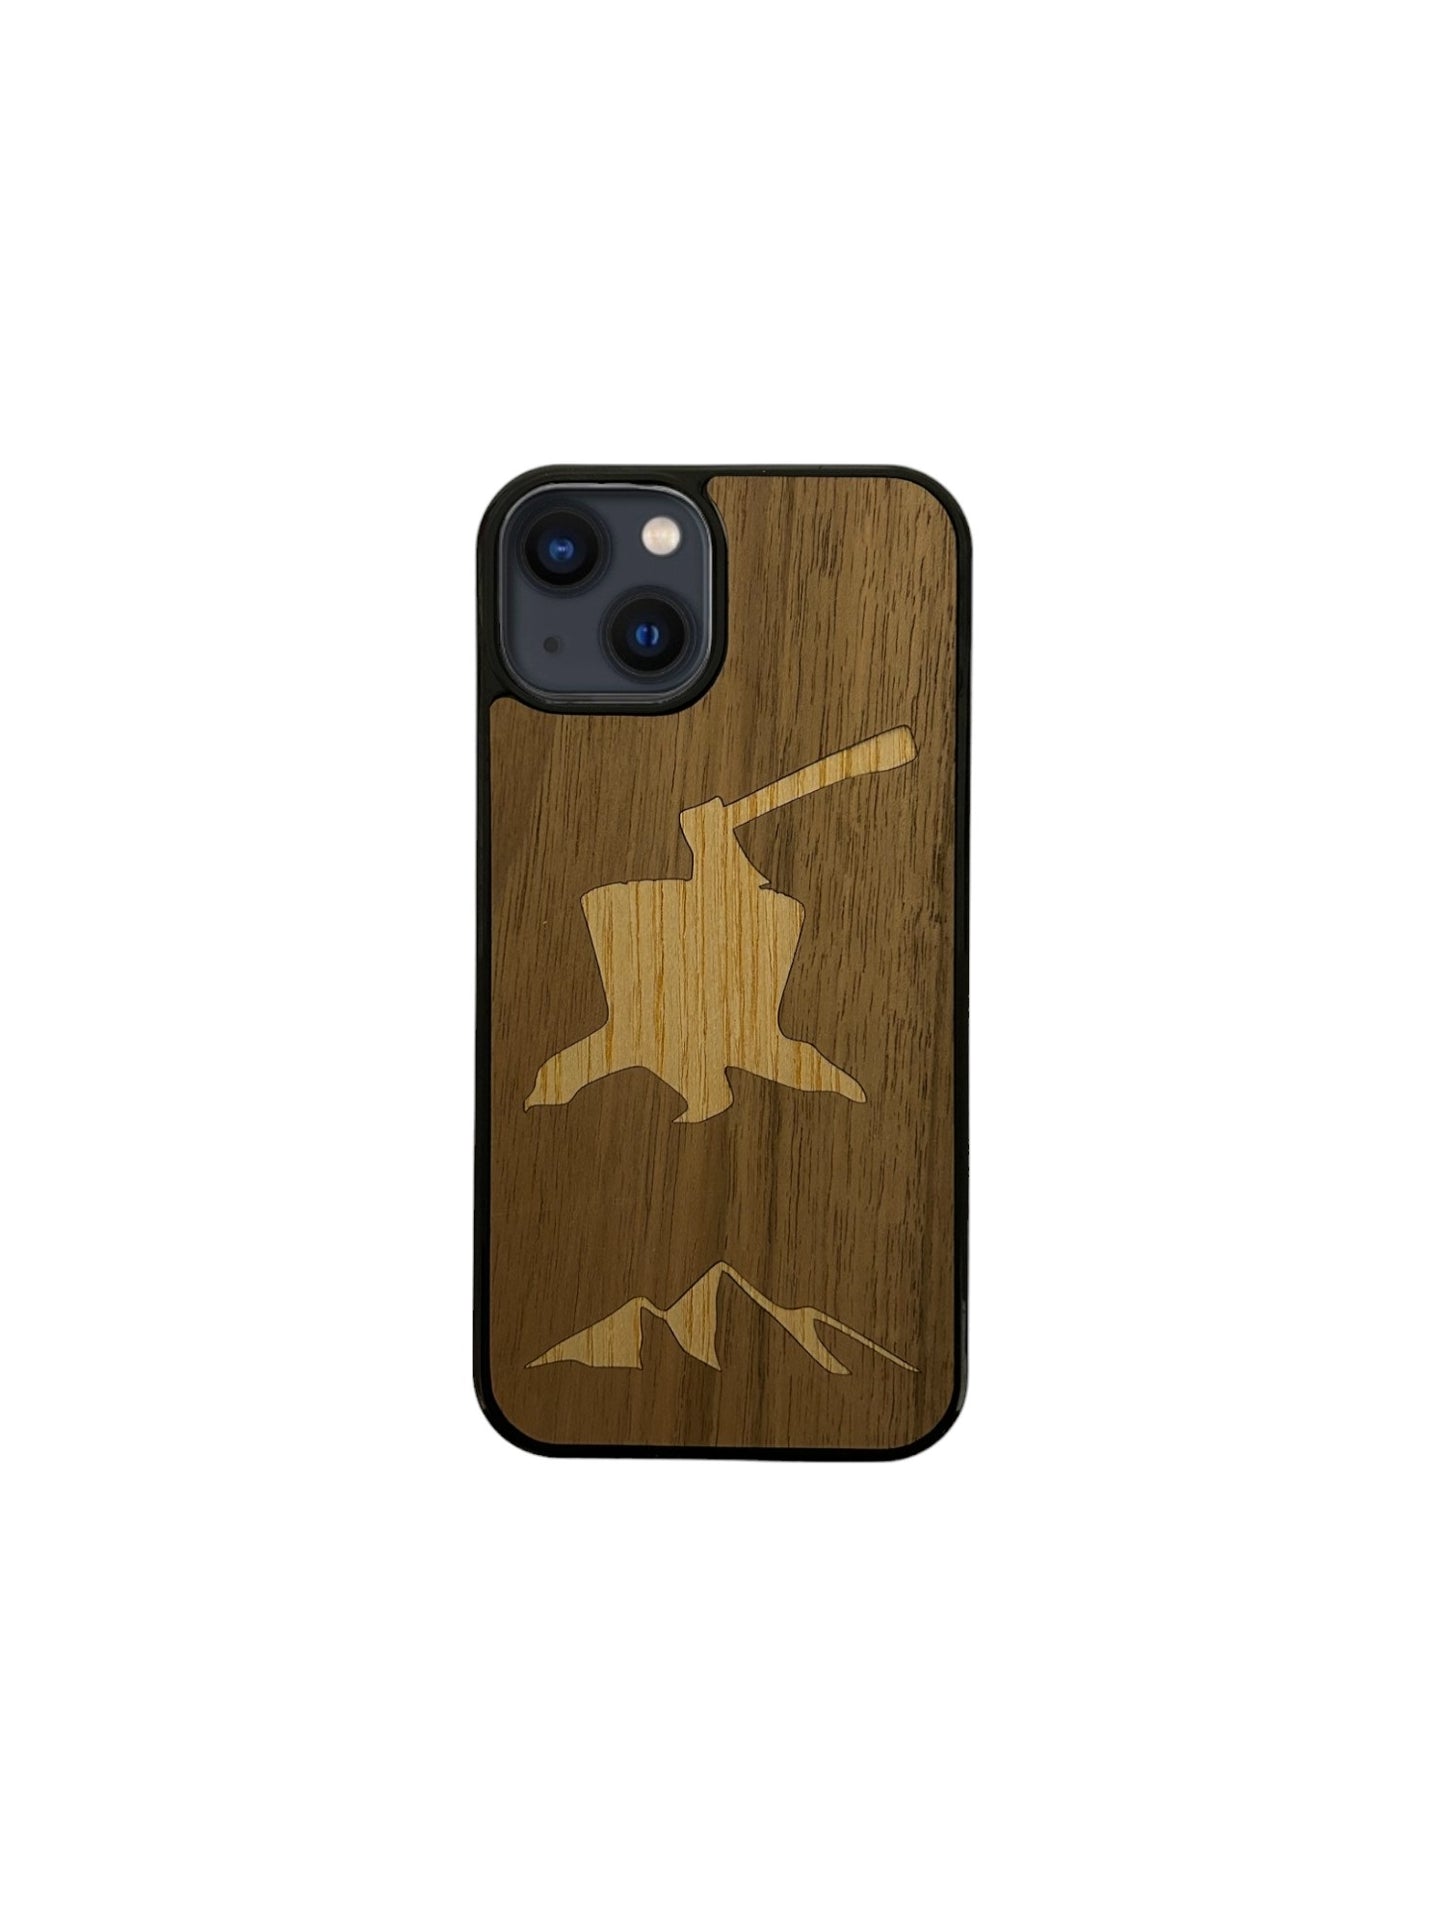 Iphone case - Wooden log